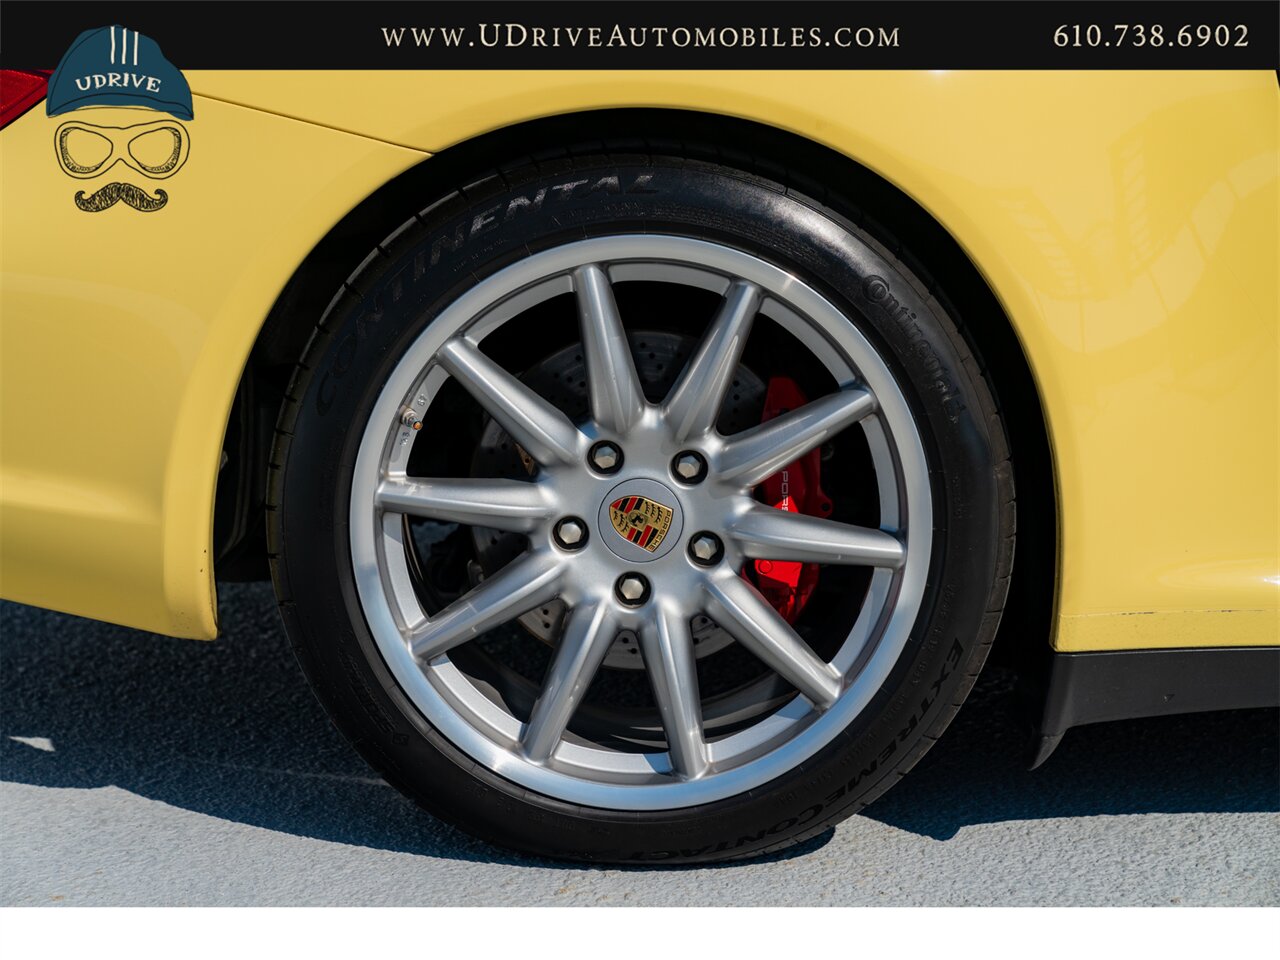 2007 Porsche 911 Carrera 4S 997 C4S Paint To Sample Pastel Yellow  6 Speed Sport Chrono Full Leather Yellow Gauges - Photo 50 - West Chester, PA 19382